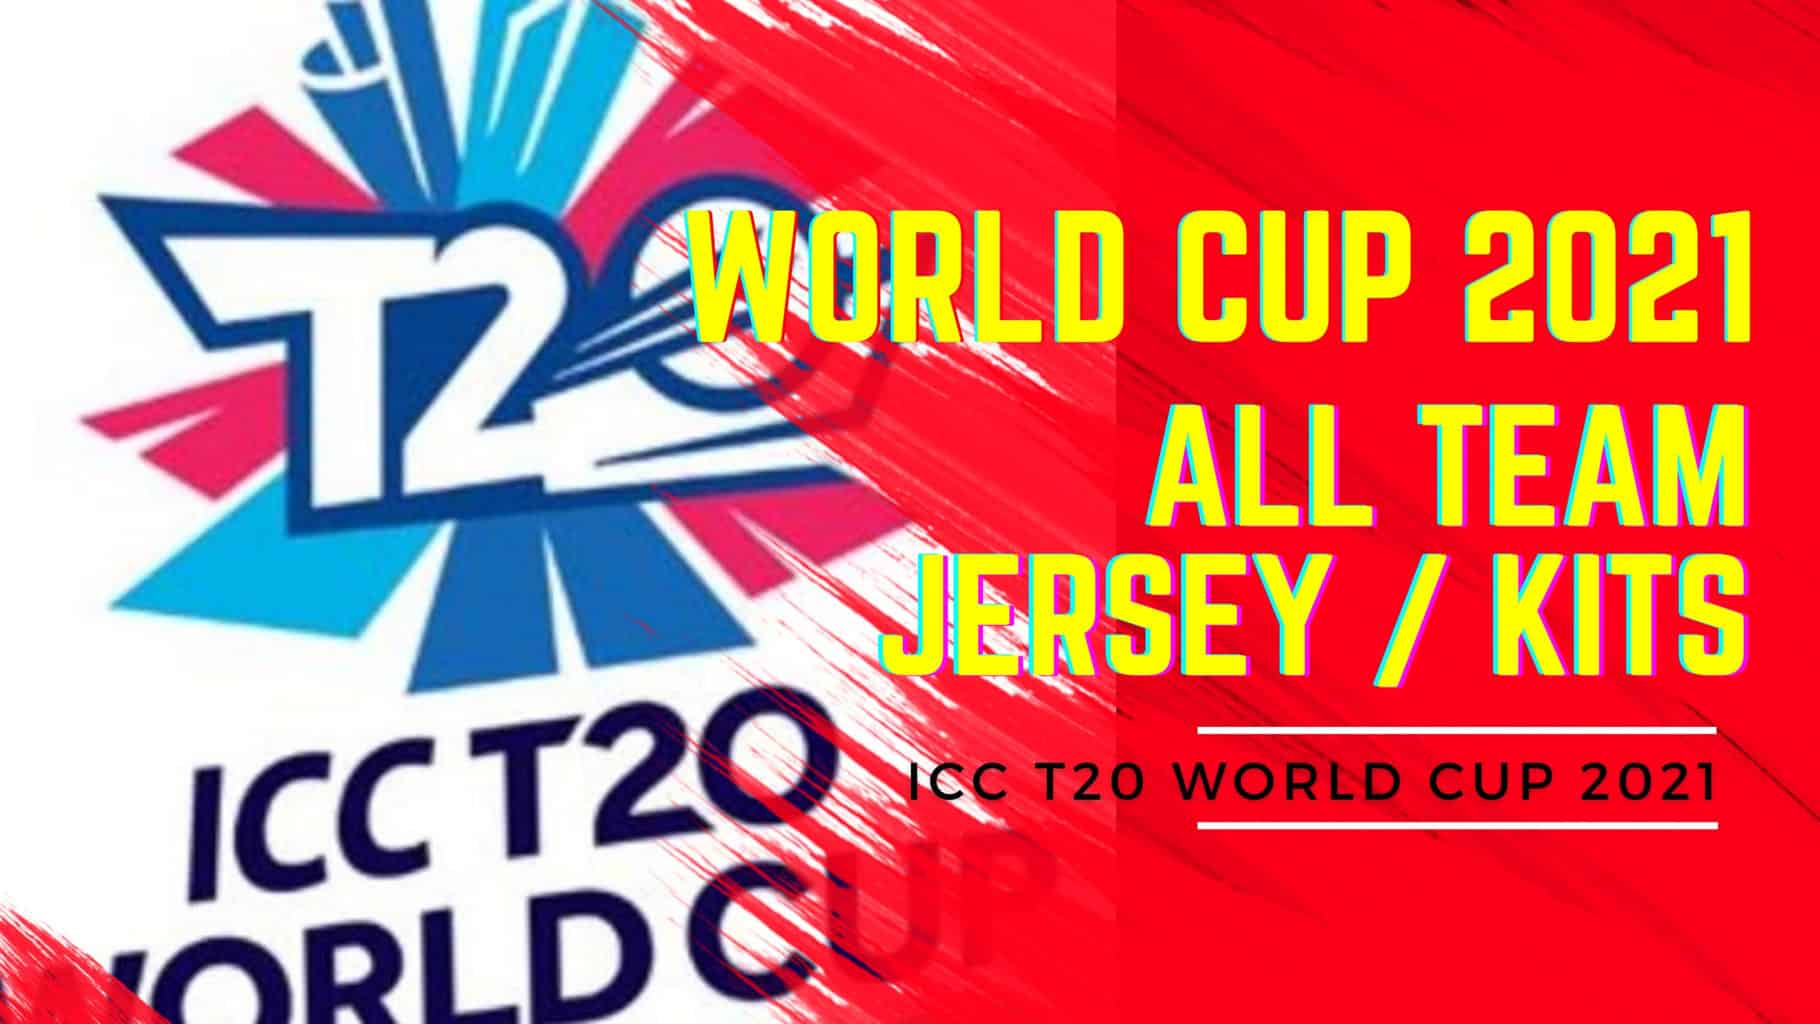 T20 World Cup All Team Jersey/Kit 2022 IND PAK on Top